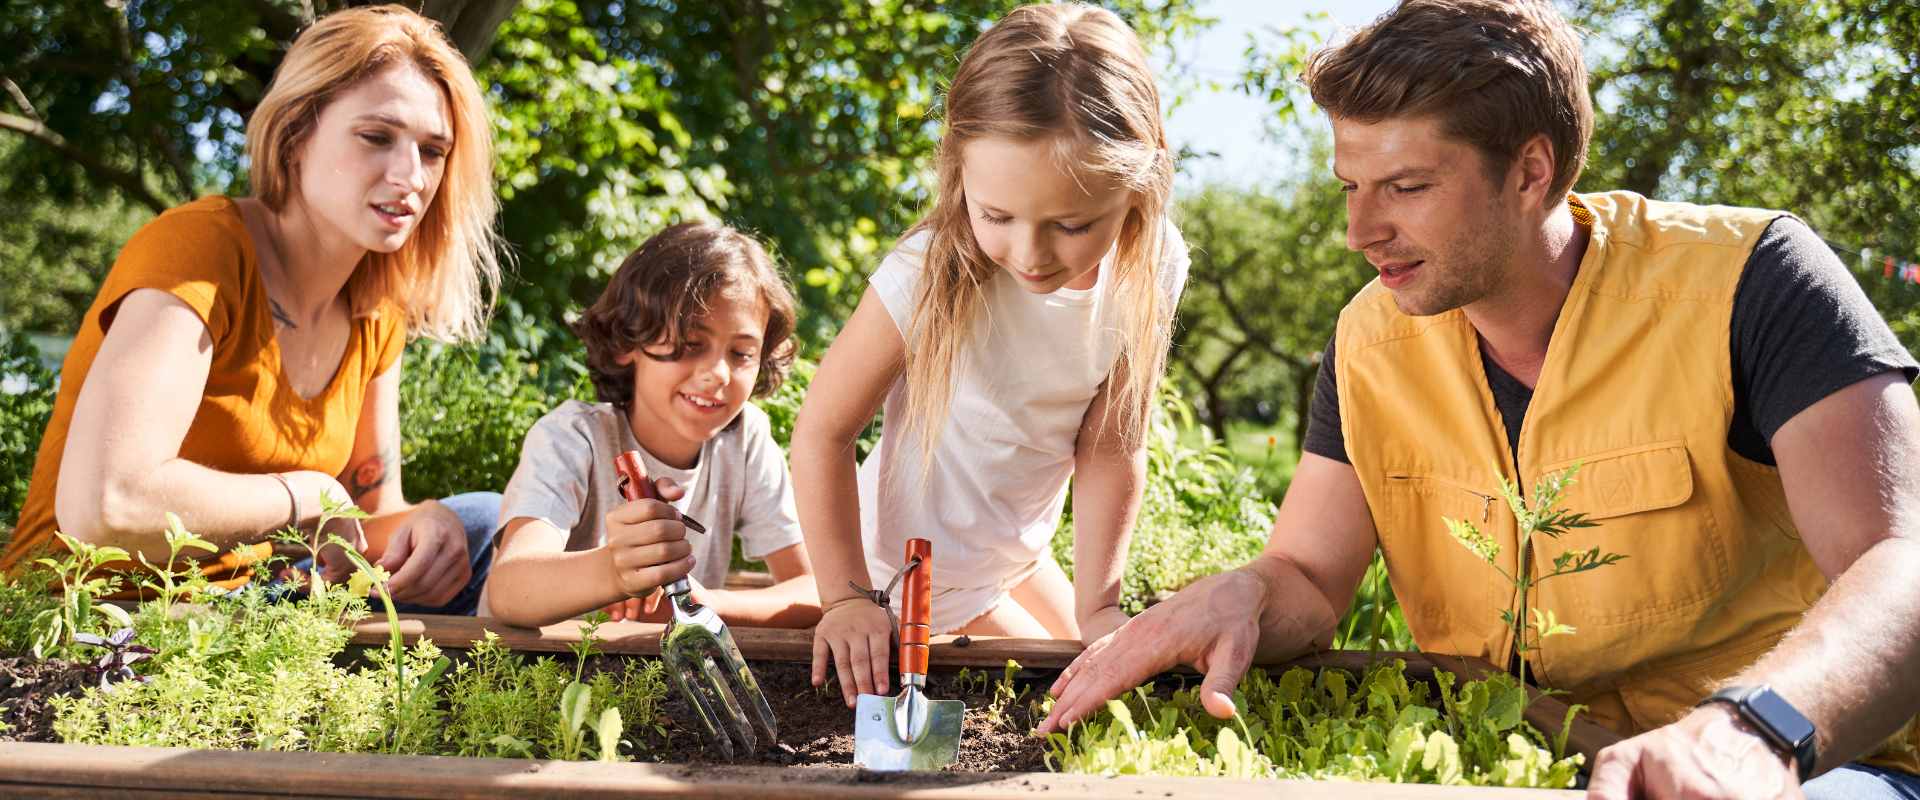 Teaching Them Young: Gardening With Kids